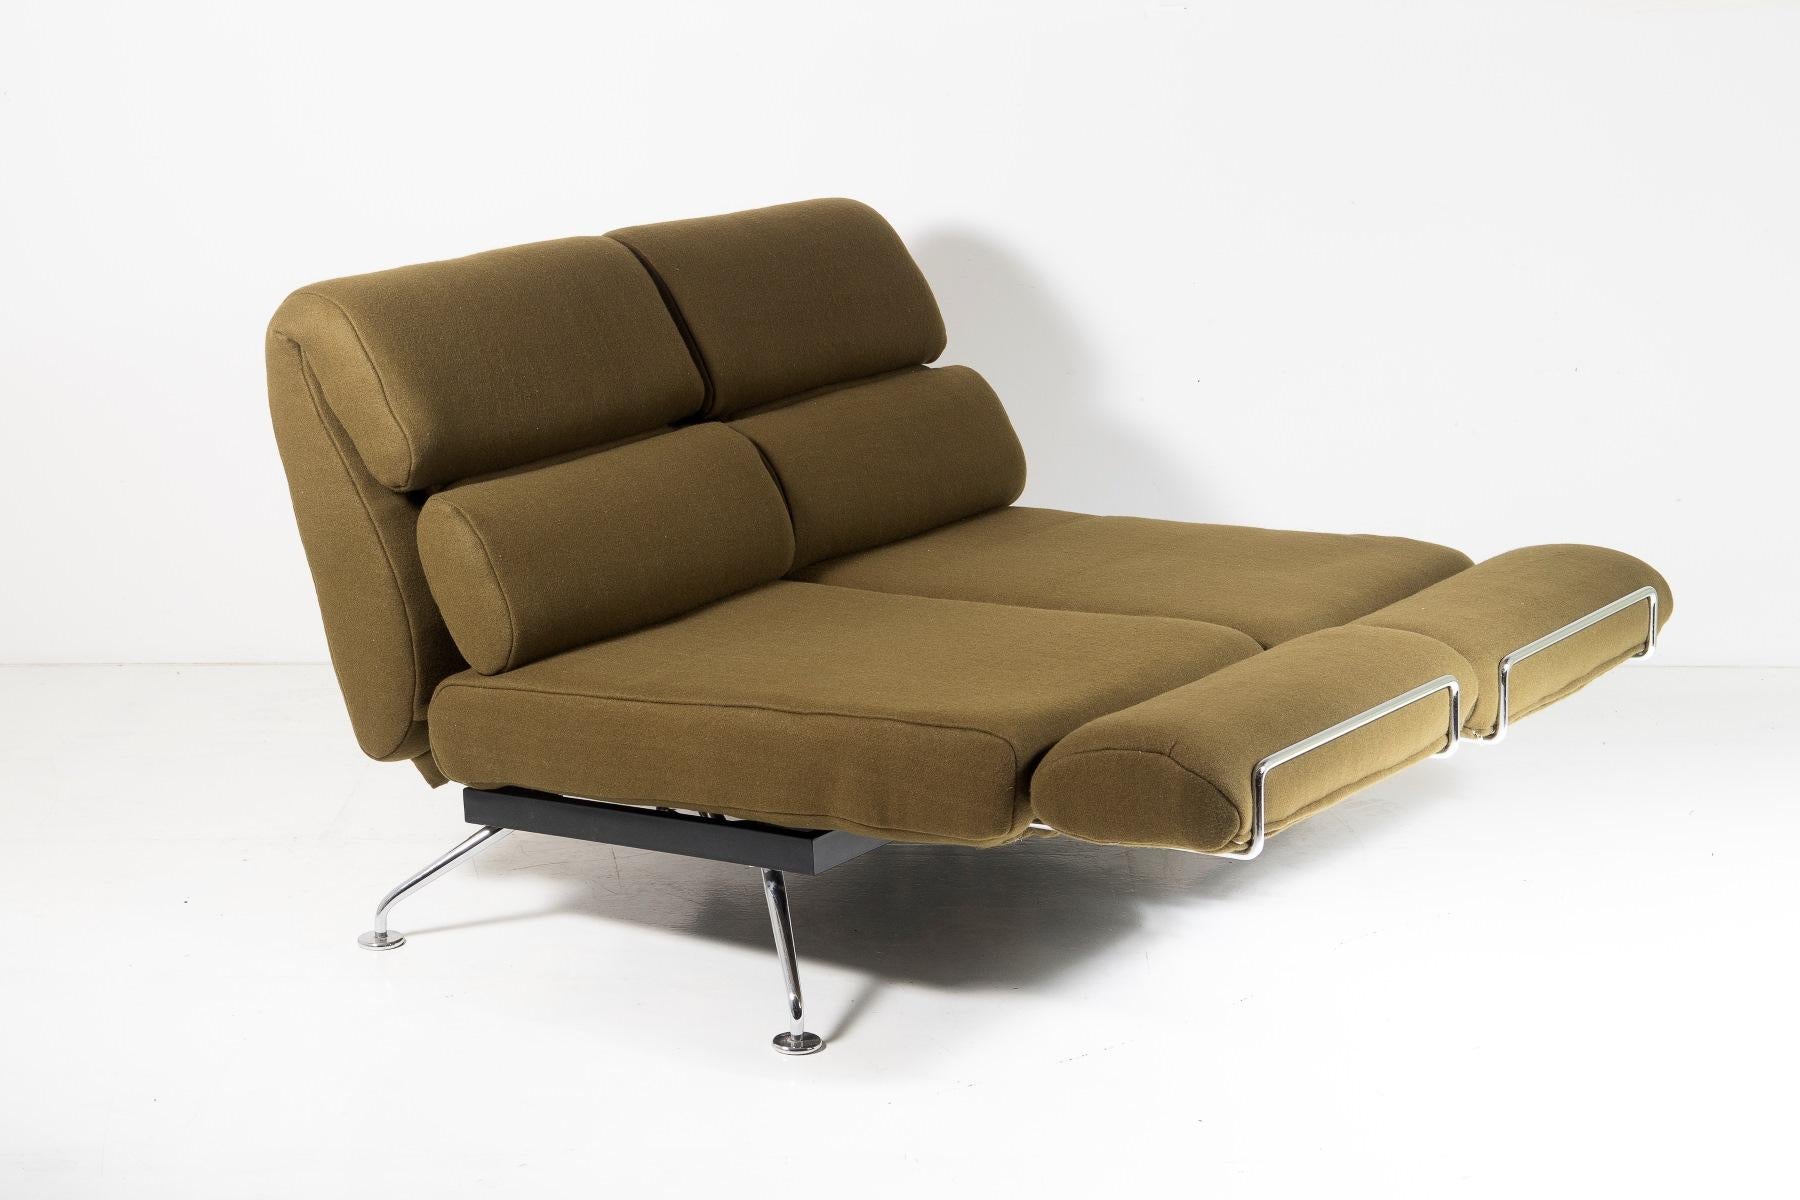 20th Century 1980s Two Seater Day Bed Recliner Sofa in Olive Green - De-Sede Ds 470 Couch